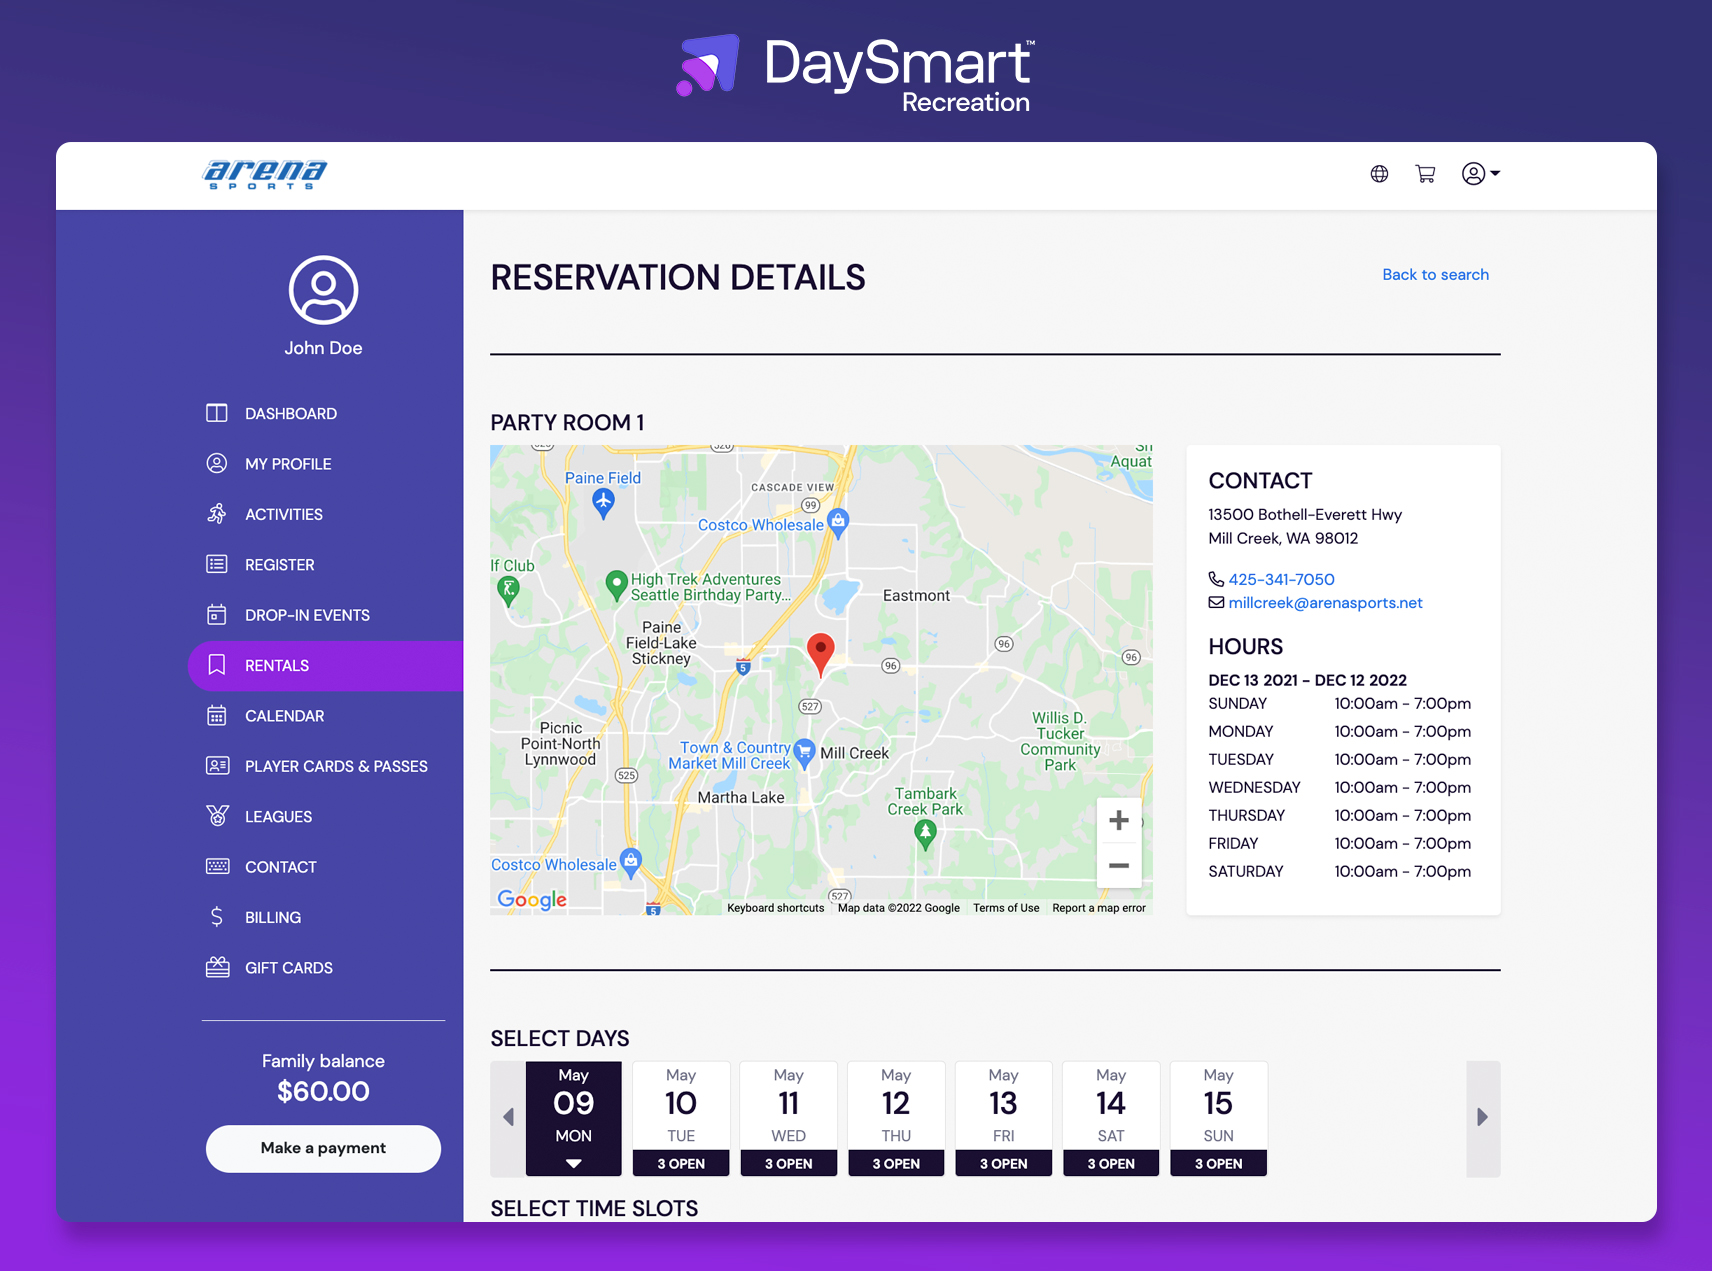 Daysmart Recreation offers a mobile-friendly interface that allows customers to register directly through your emails, your website, or your mobile app at their convenience.